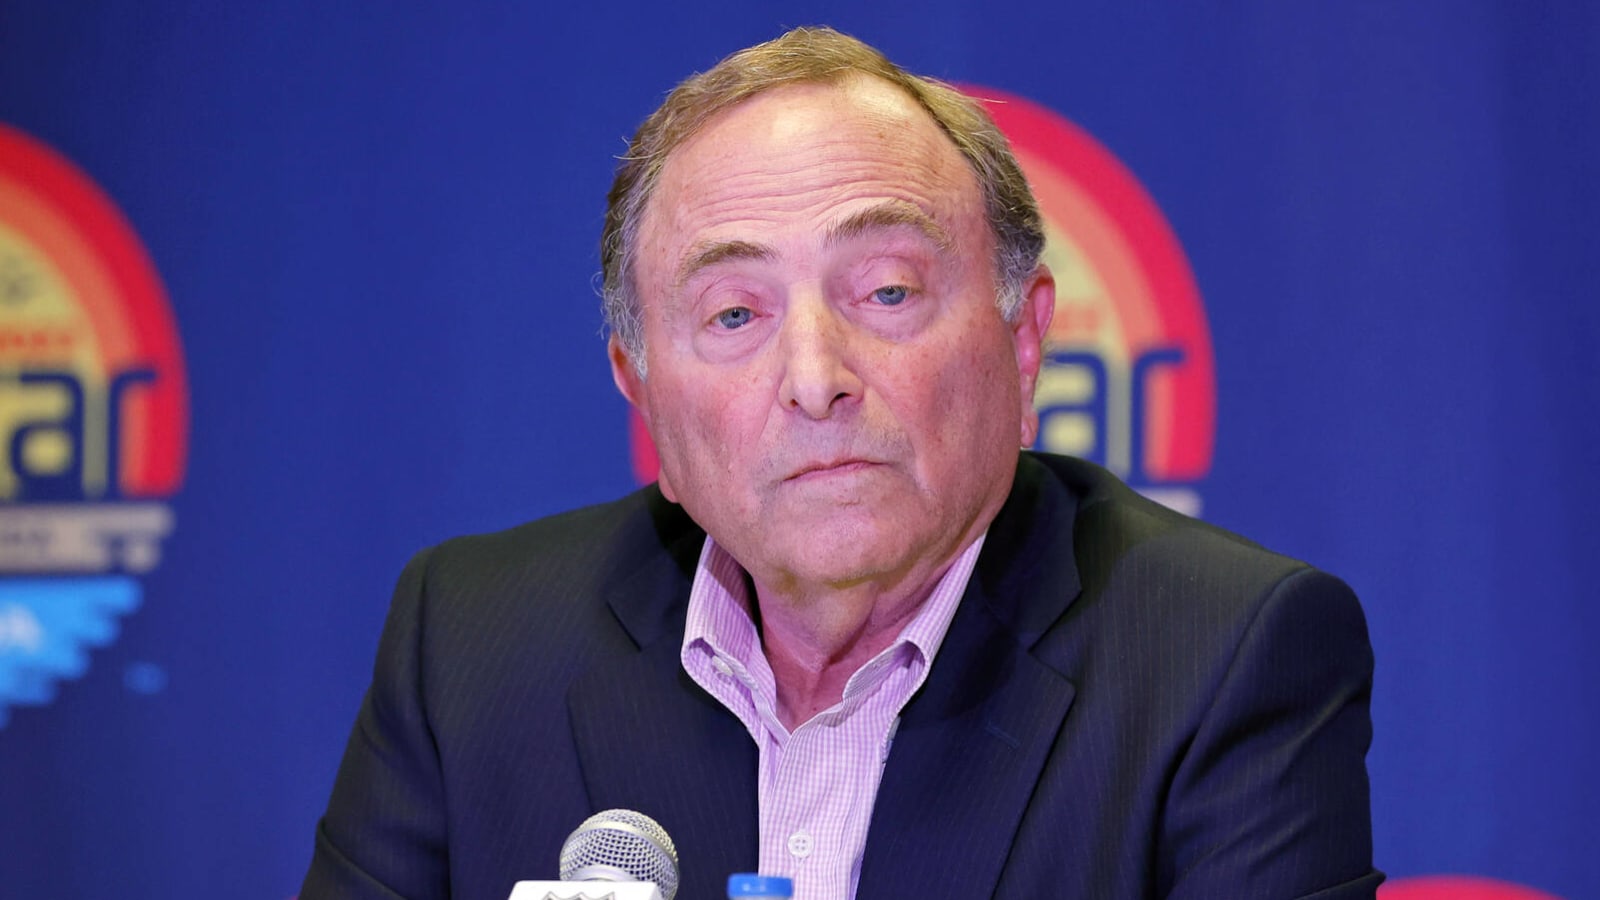 NHL commissioner Gary Bettman provides status of Coyotes arena situation